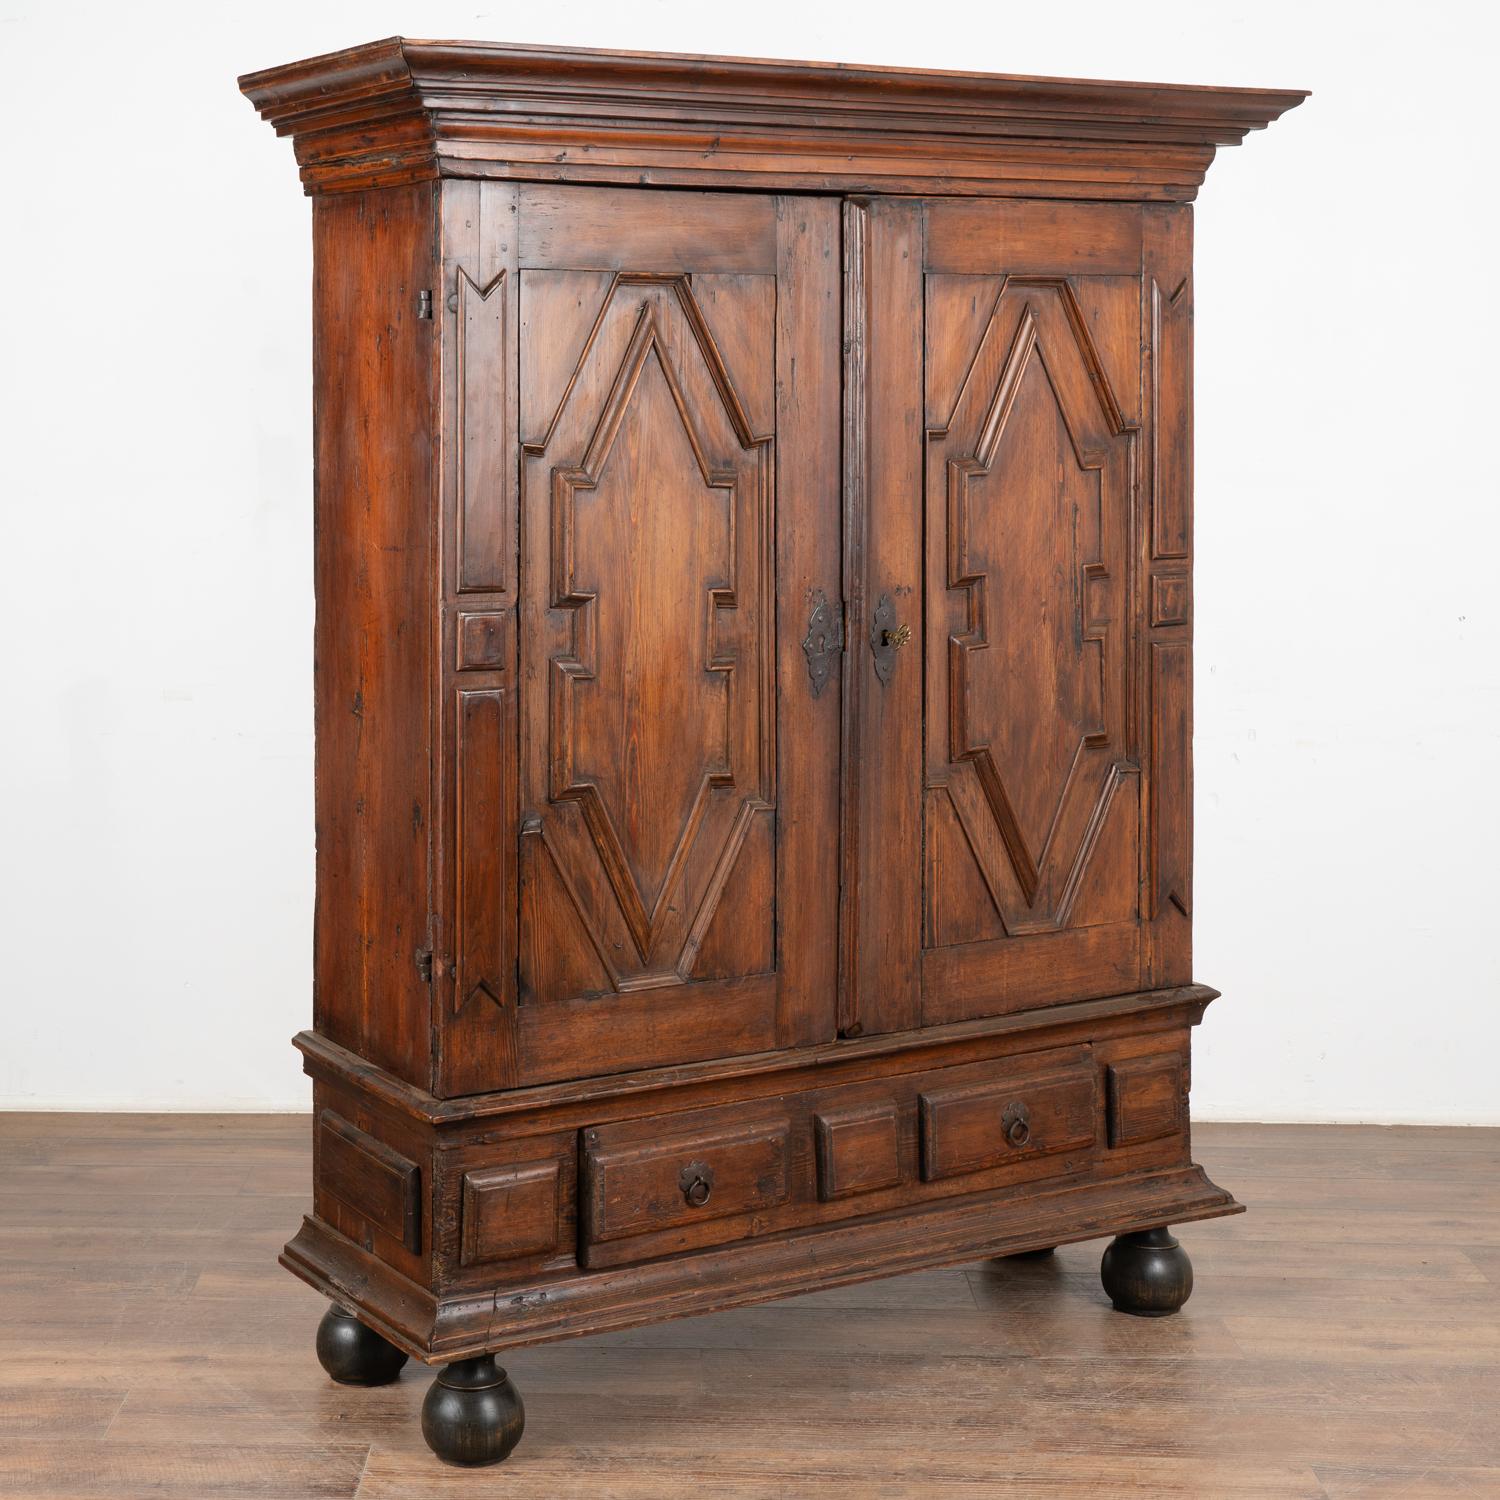 The heavy baroque style carving and paneling in the doors add to the visual impact of this handsome dark pine armoire.
The interior reveals three shelves, one large lower drawer all resting on bun feet.
This 6' tall armoire has been restored and